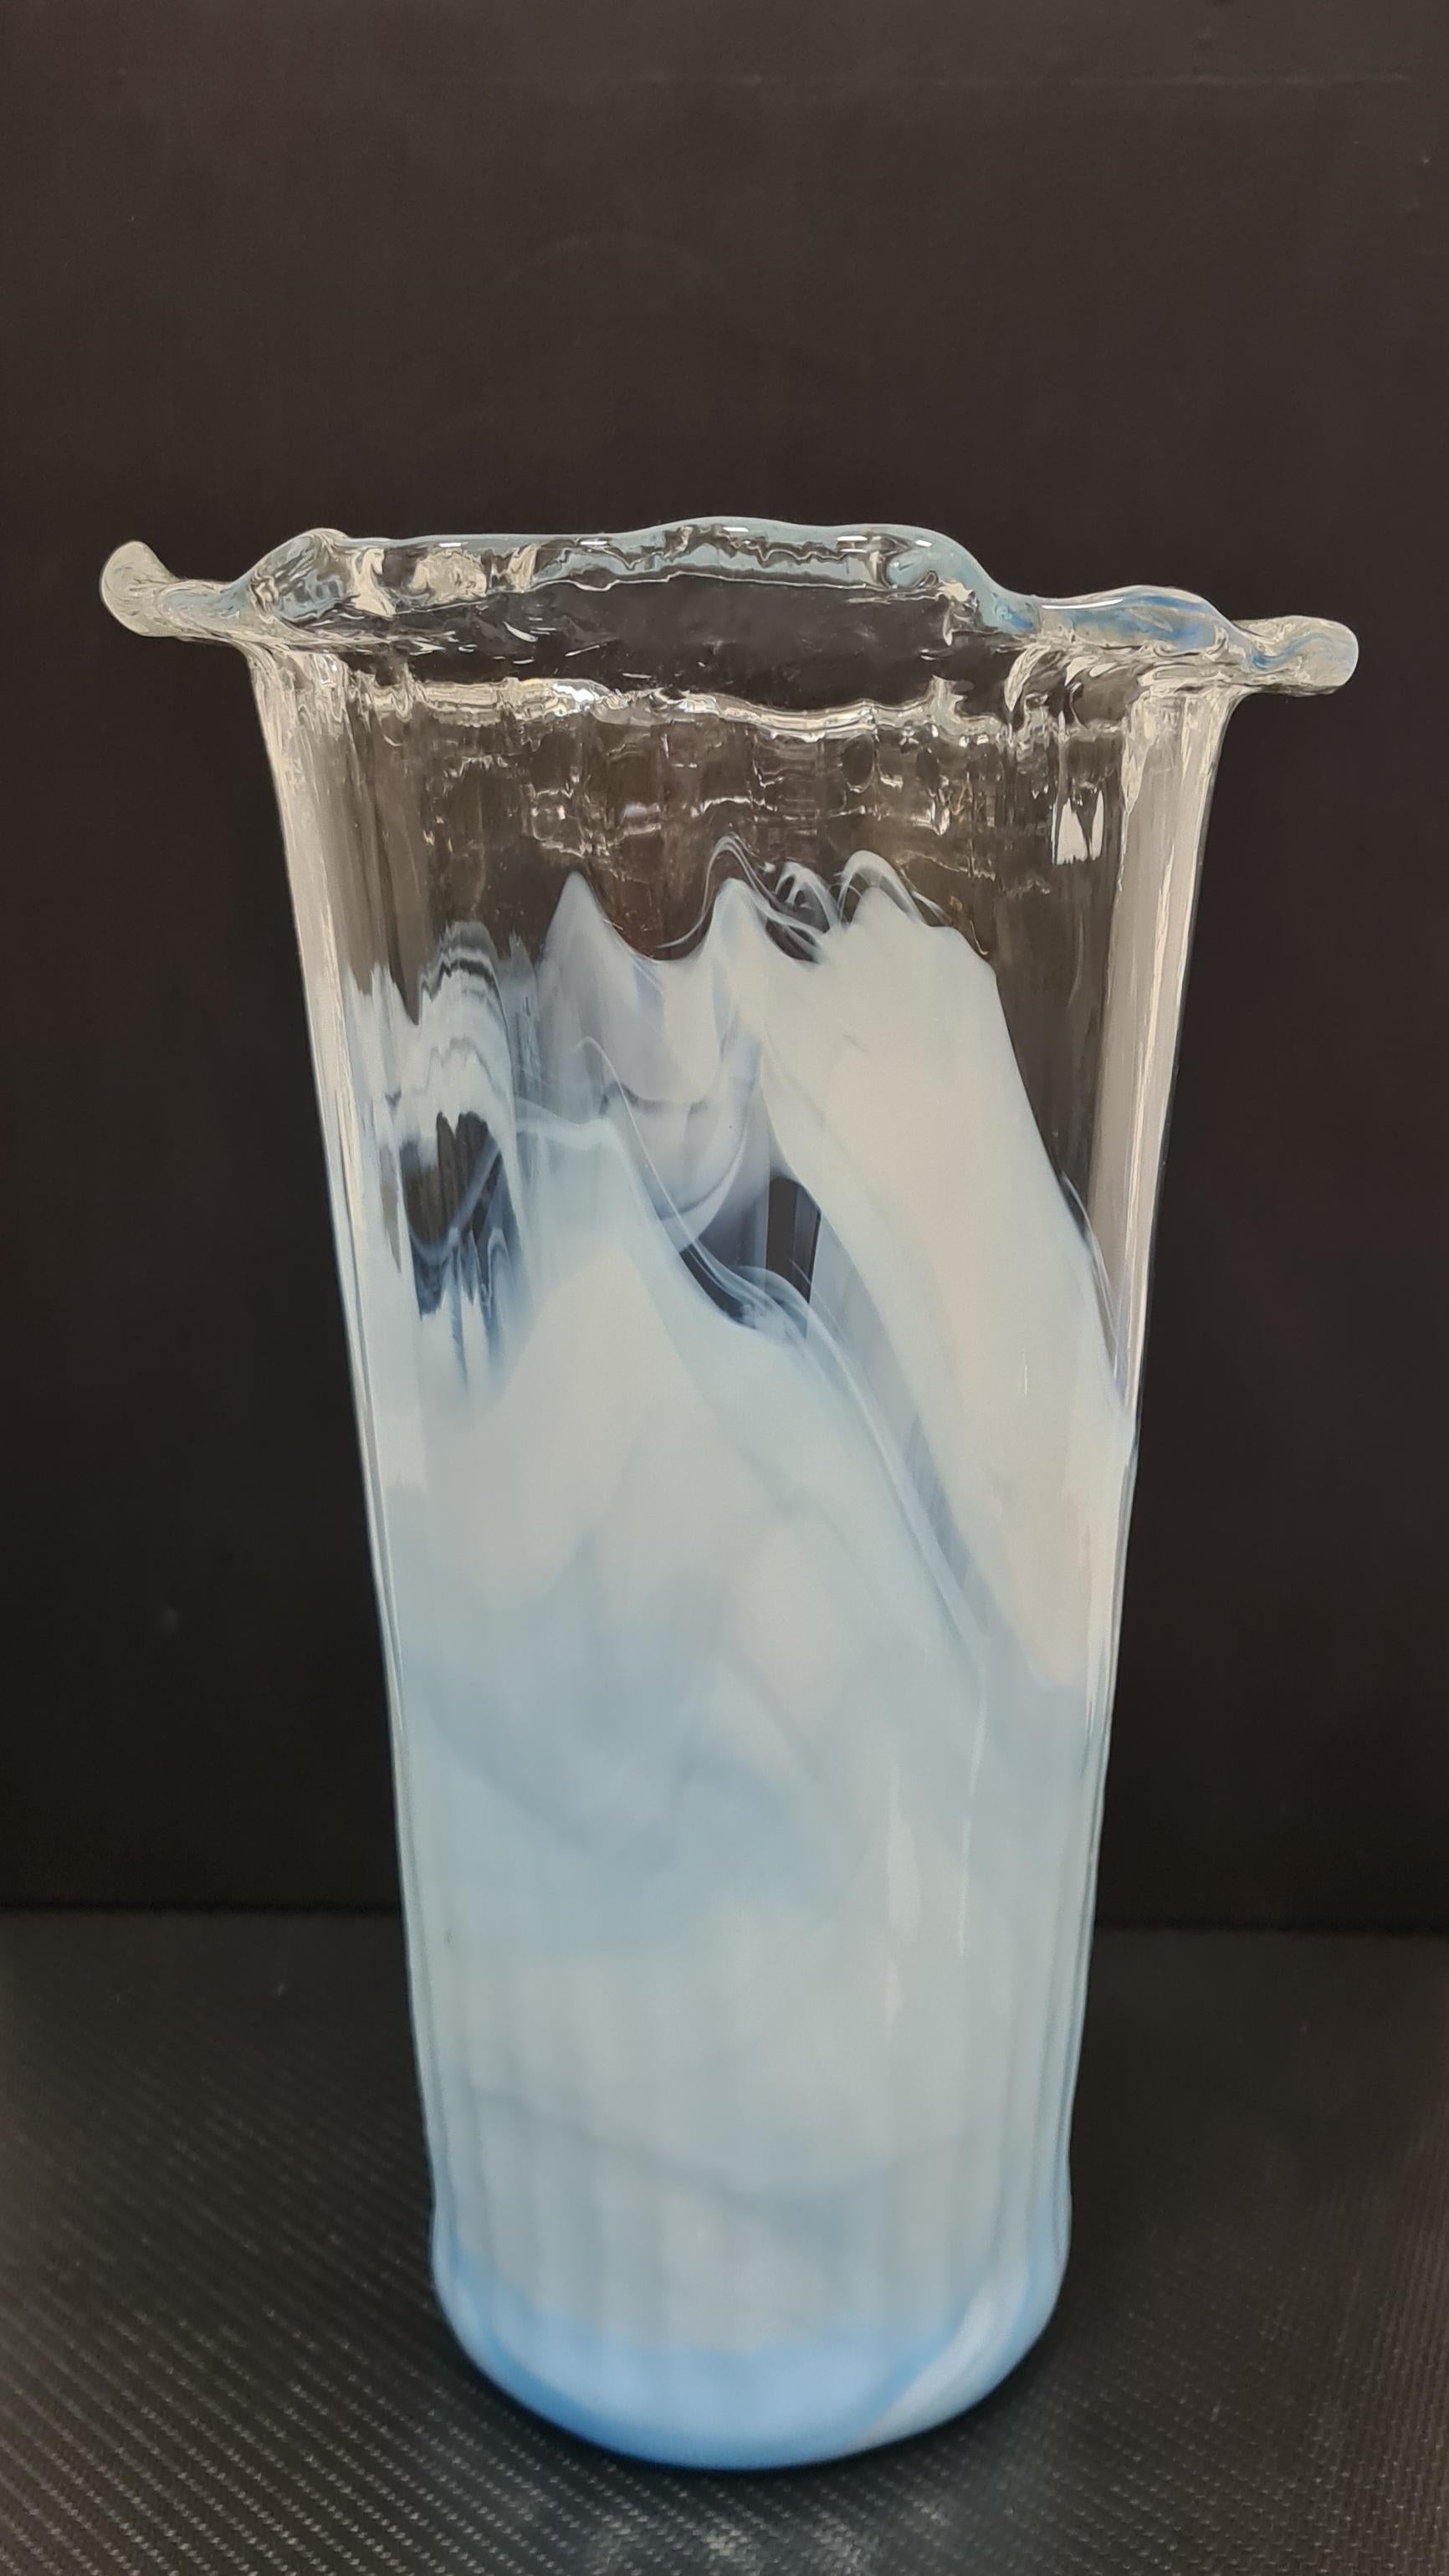 Murano art glass vase signed La Murrina.

Refined jagged-edge vase with a milk-blue glass base that gradually becomes transparent toward the rim.

Hand-blown this model was made in the 1980s' by the famous Venetian glassworks La Murrina whose